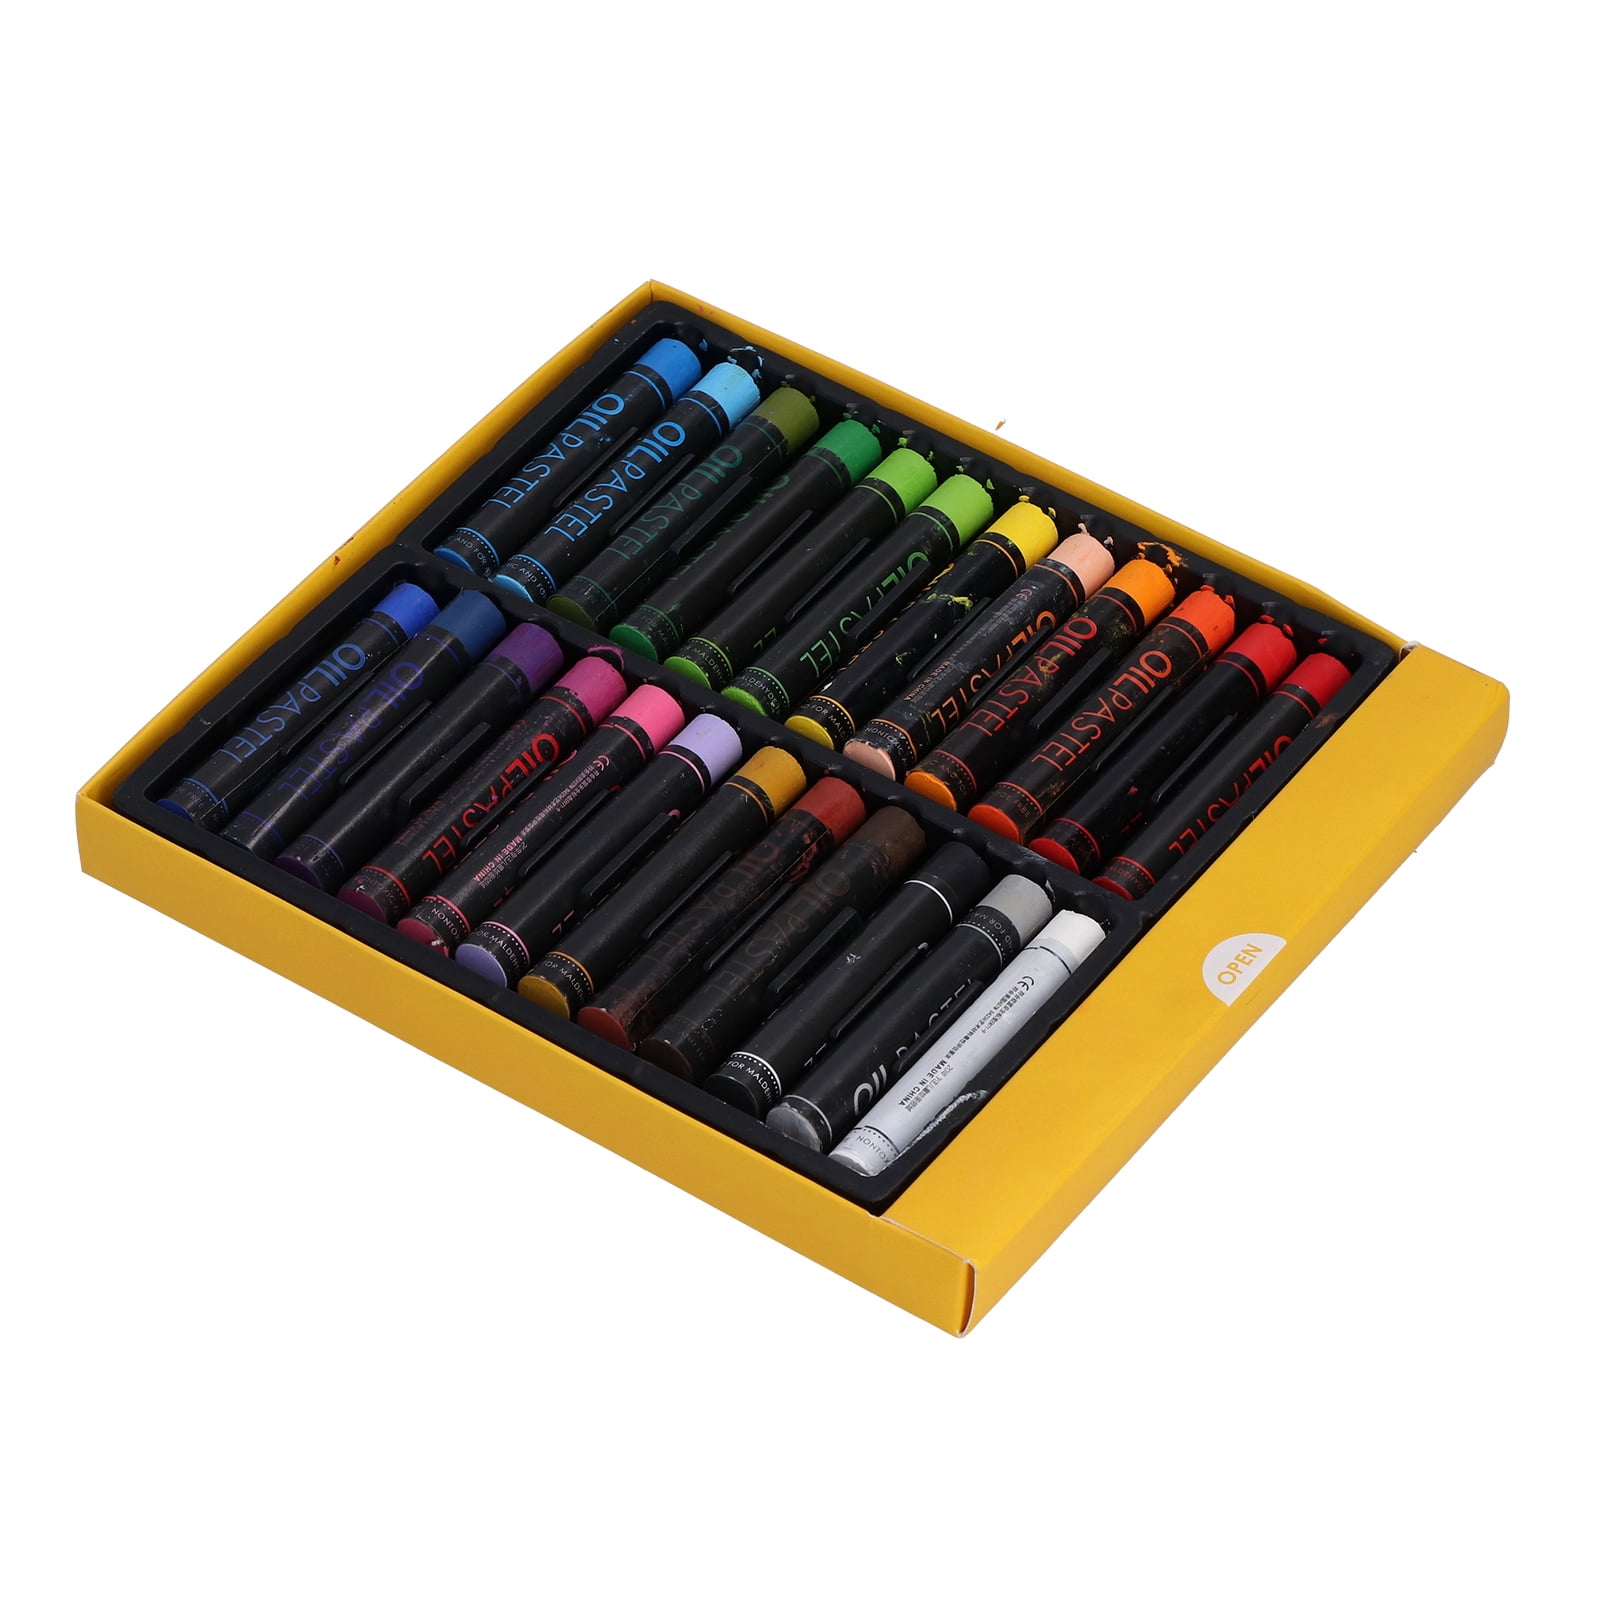  Agatige Oil Pastels Set, Oil Painting Pen Crayons Oil Paint  Sticks Drawing Tool for Graffiti Creation(24 Colors)